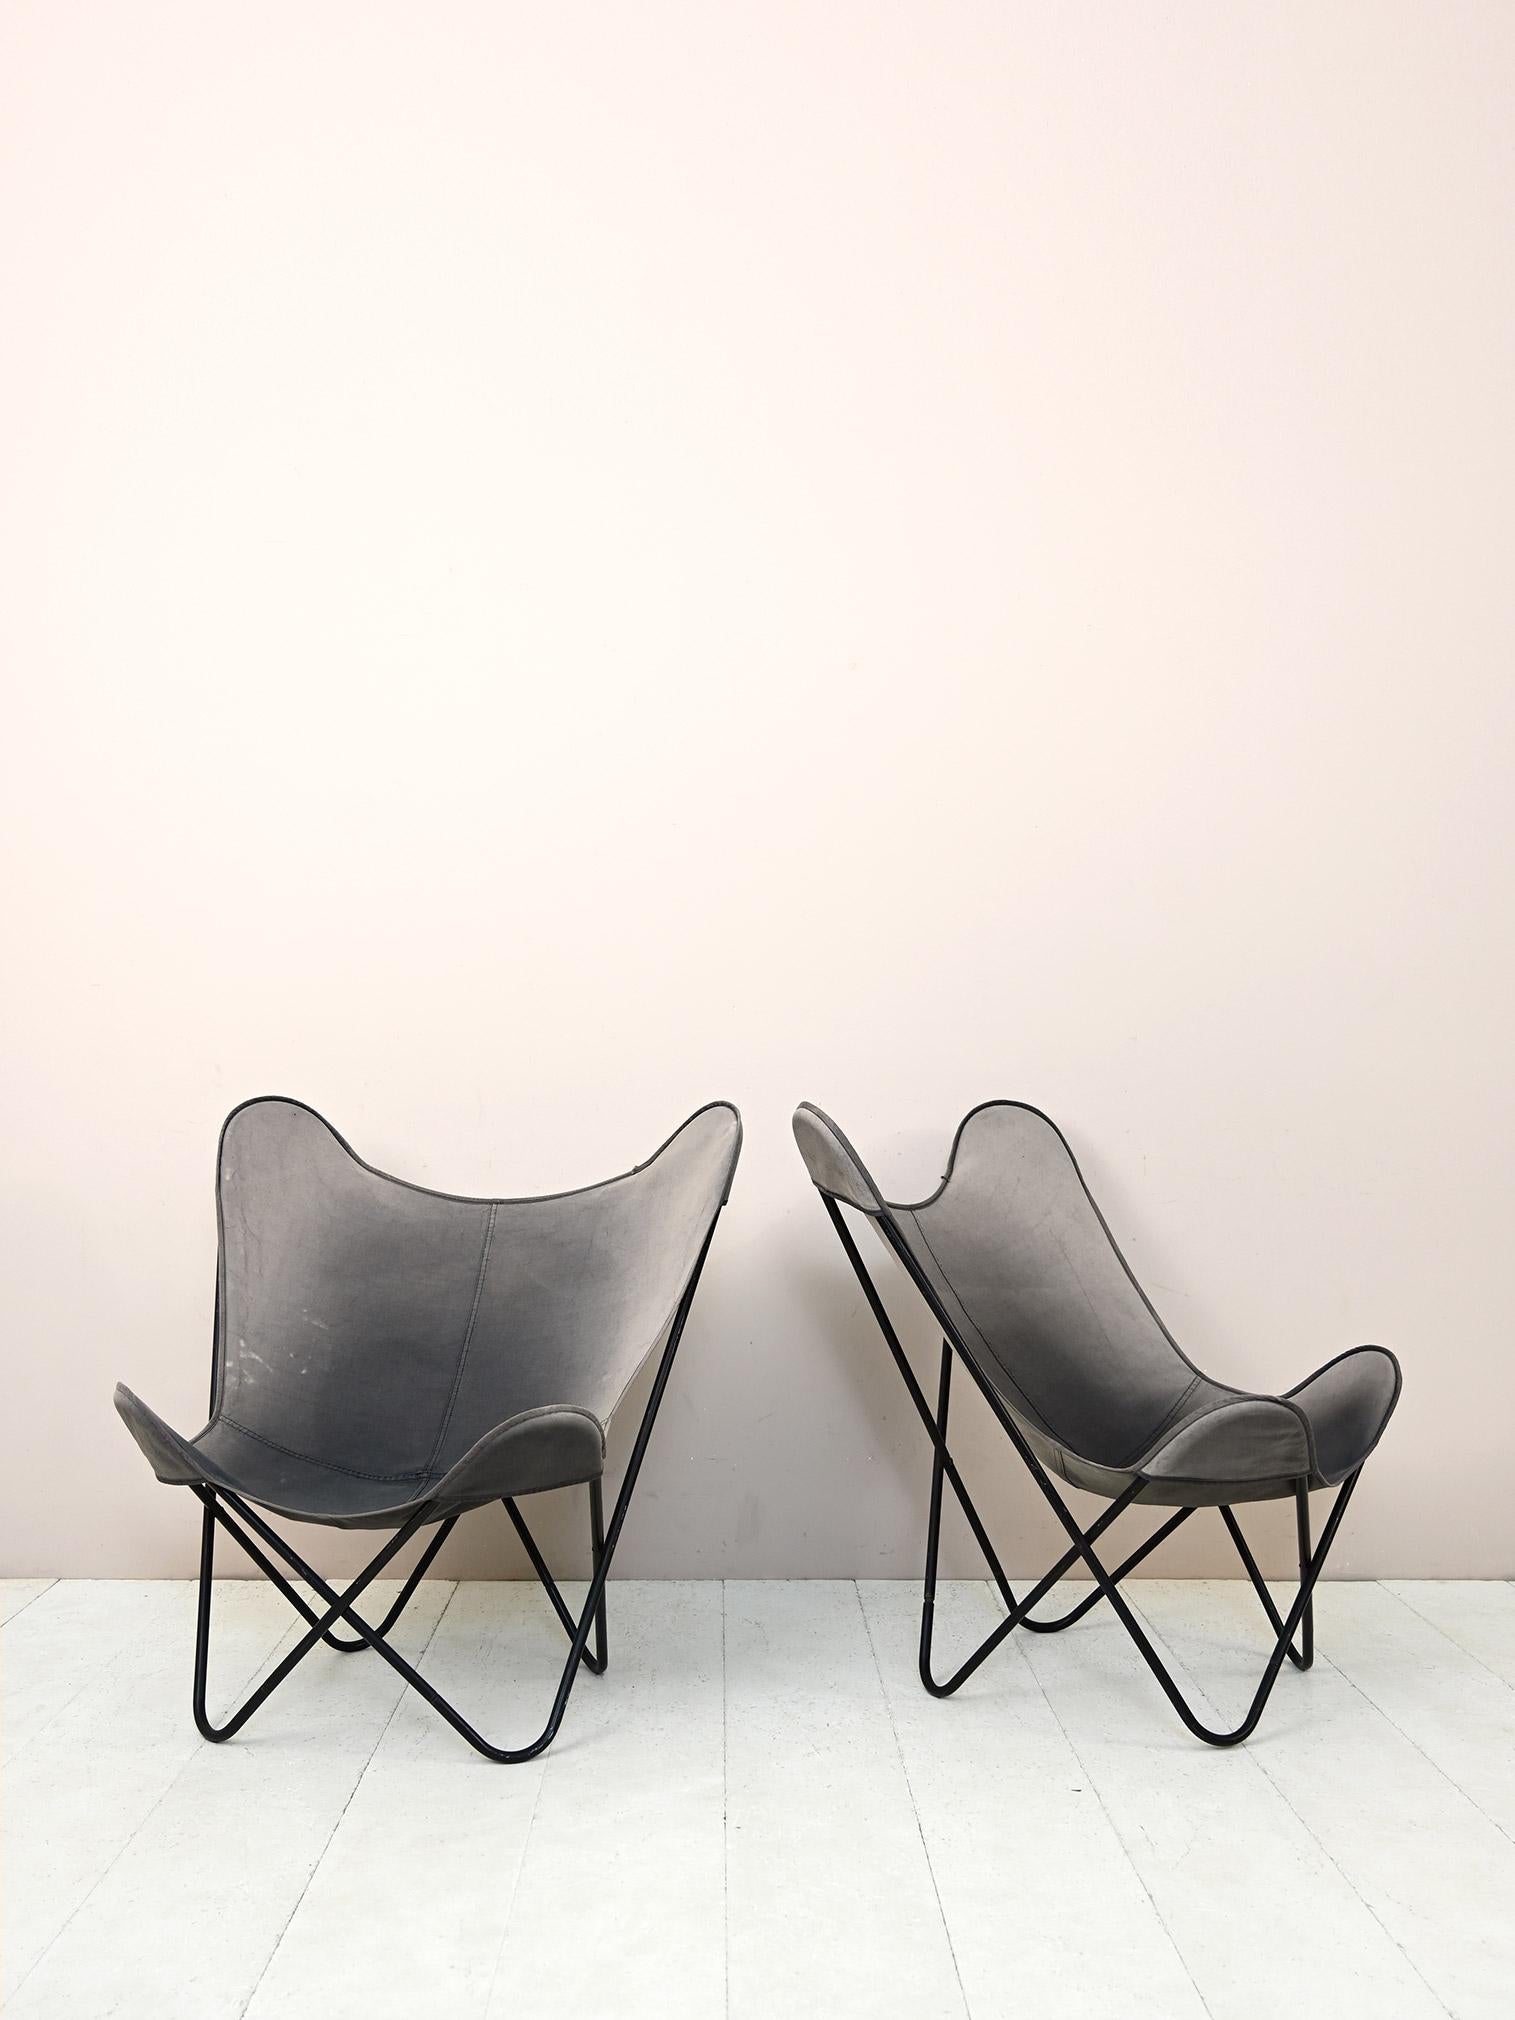 Original Scandinavian metal and fabric chairs.

These lightweight, modern chairs consist of a black metal base on which the fabric that serves as the seat rests.
Ideal for both indoors and a conservatory. They will add character to the